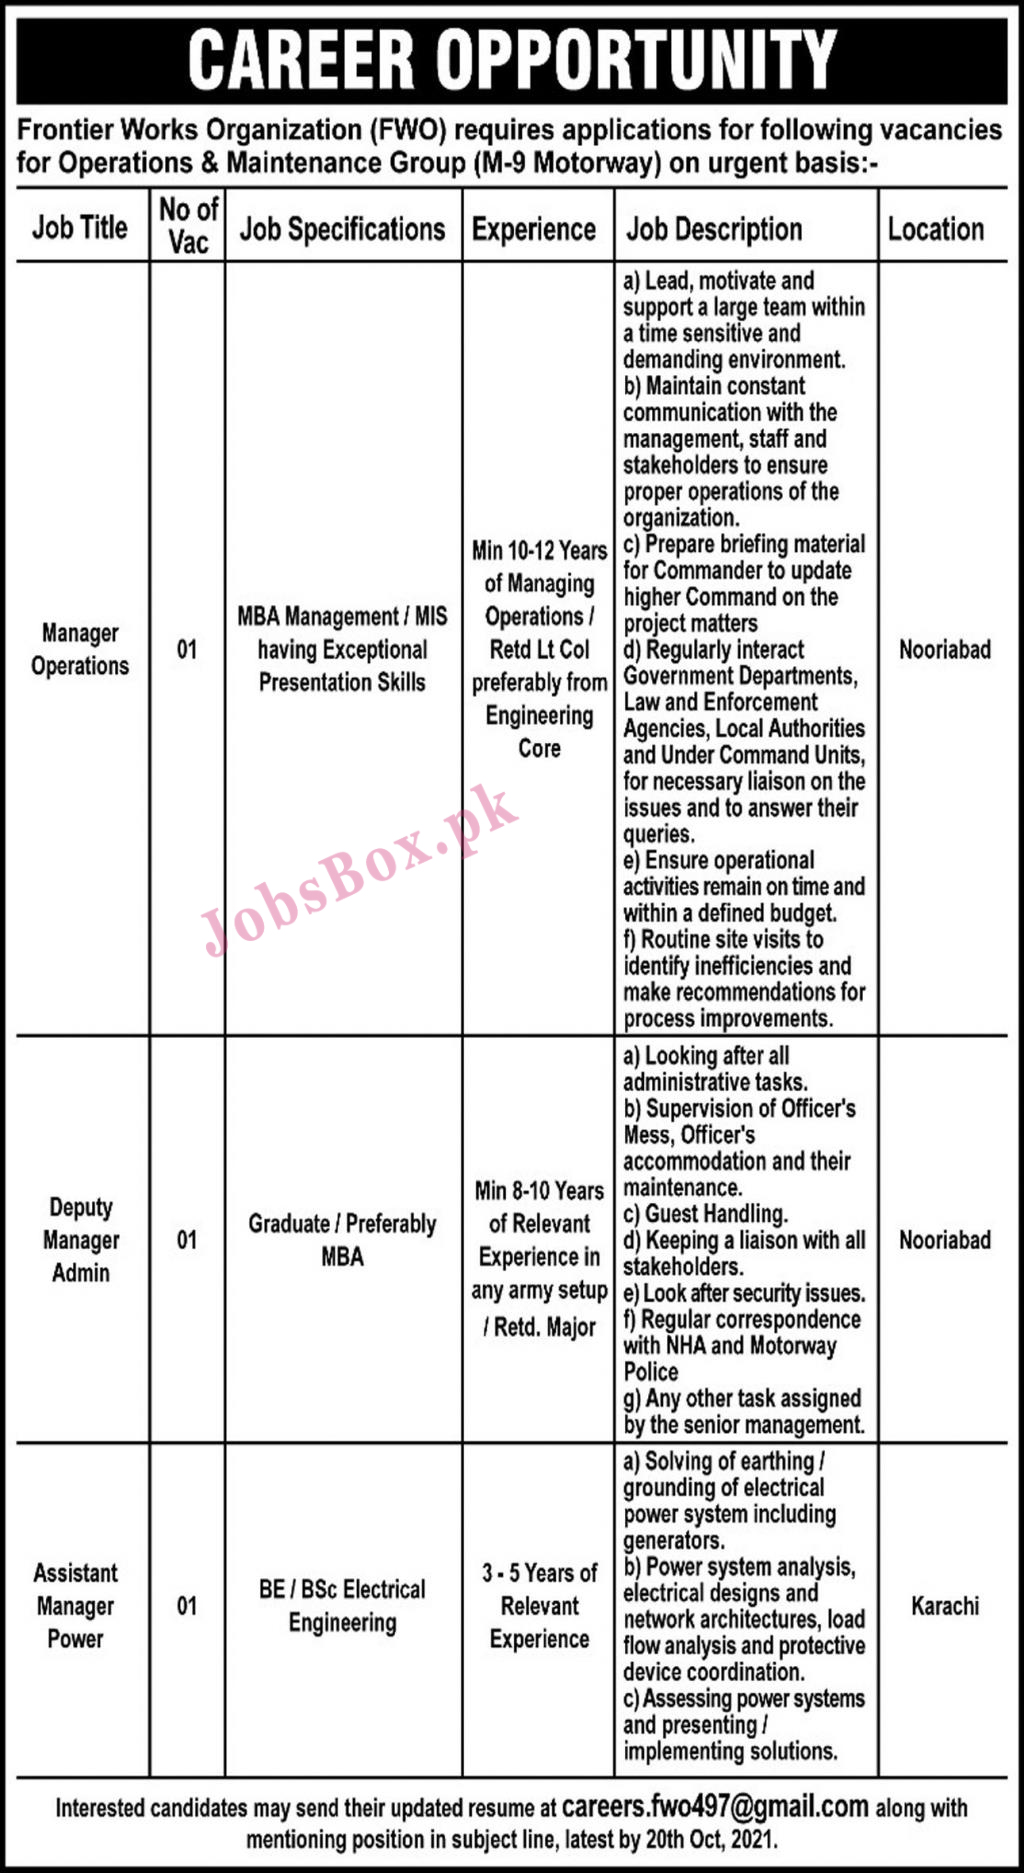 Frontier Works Organization FWO Jobs 2021 – careers.fwo.com.pk